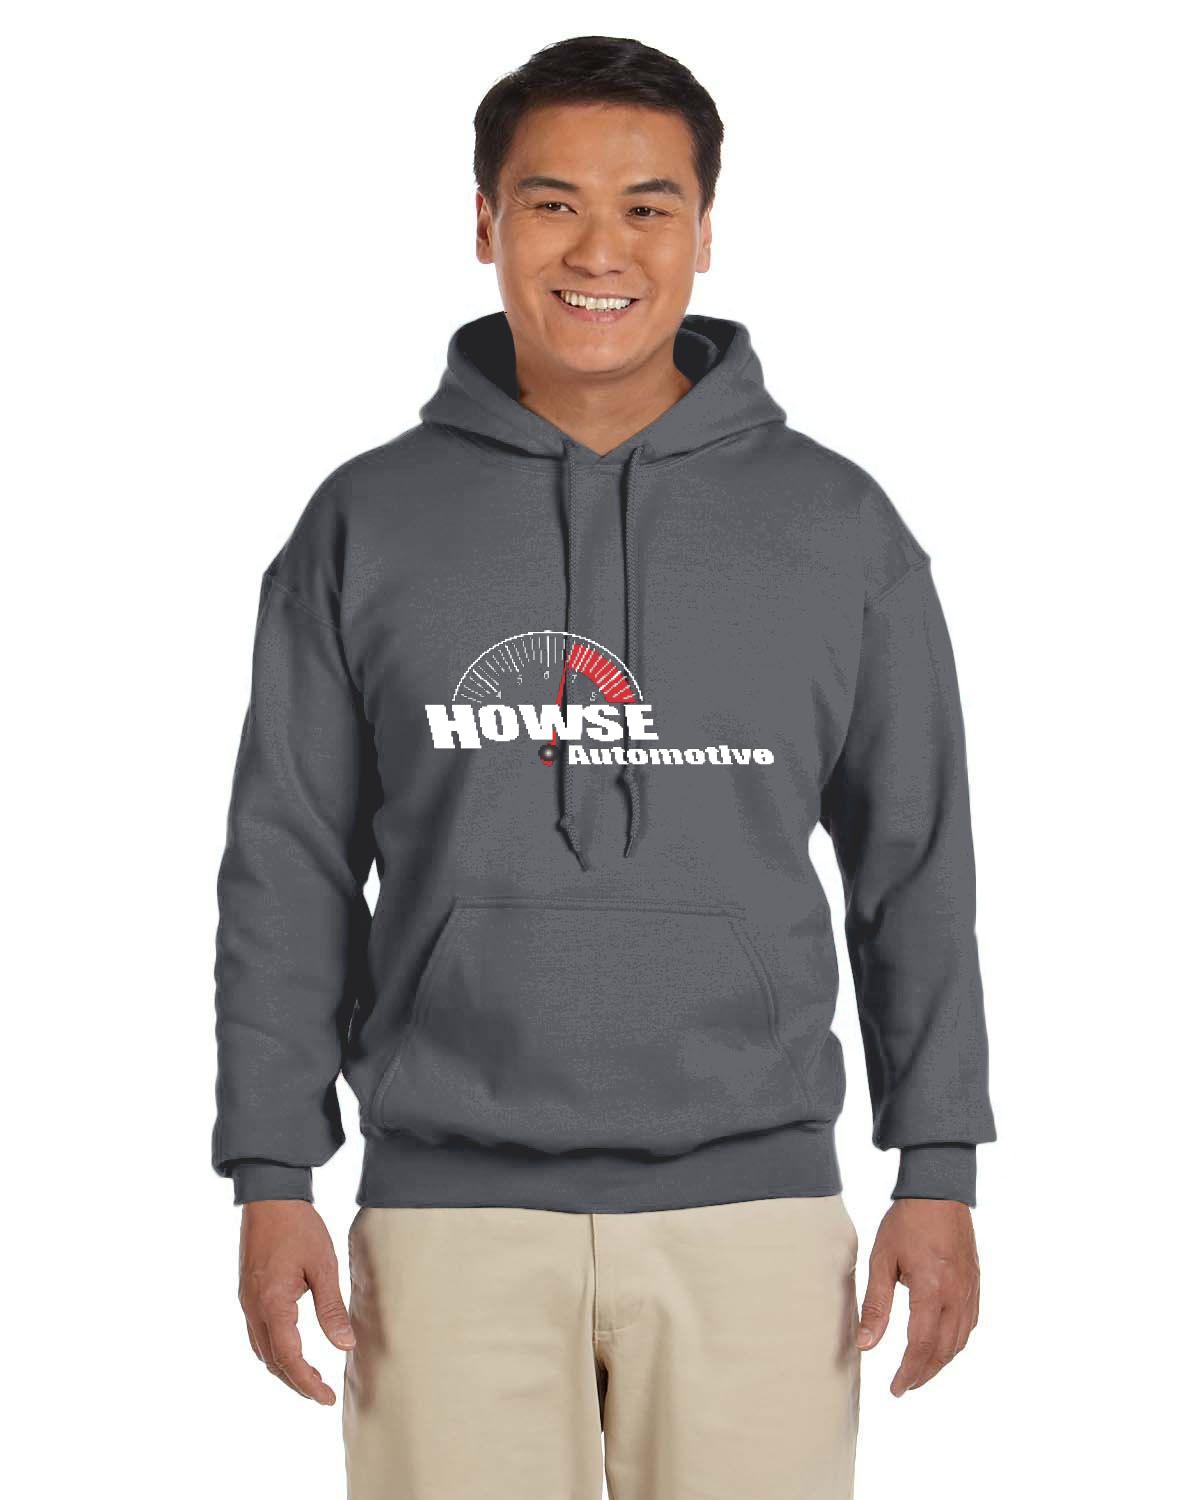 Howse Automotive Adult Hoodie